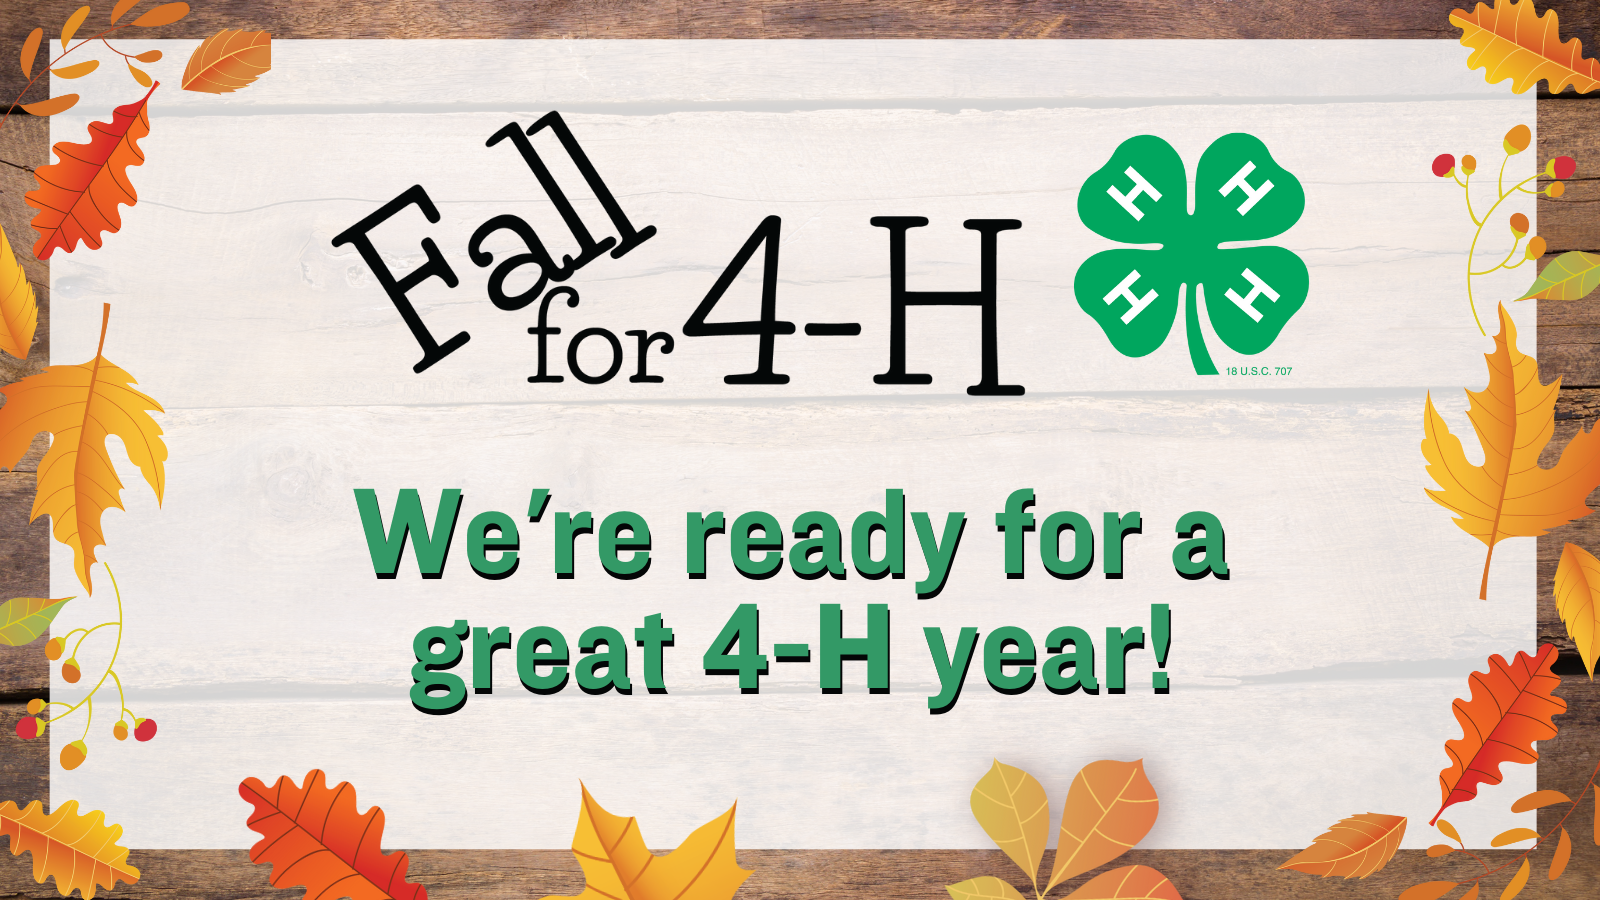 Fall for 4-H We're ready for a great 4-H year!